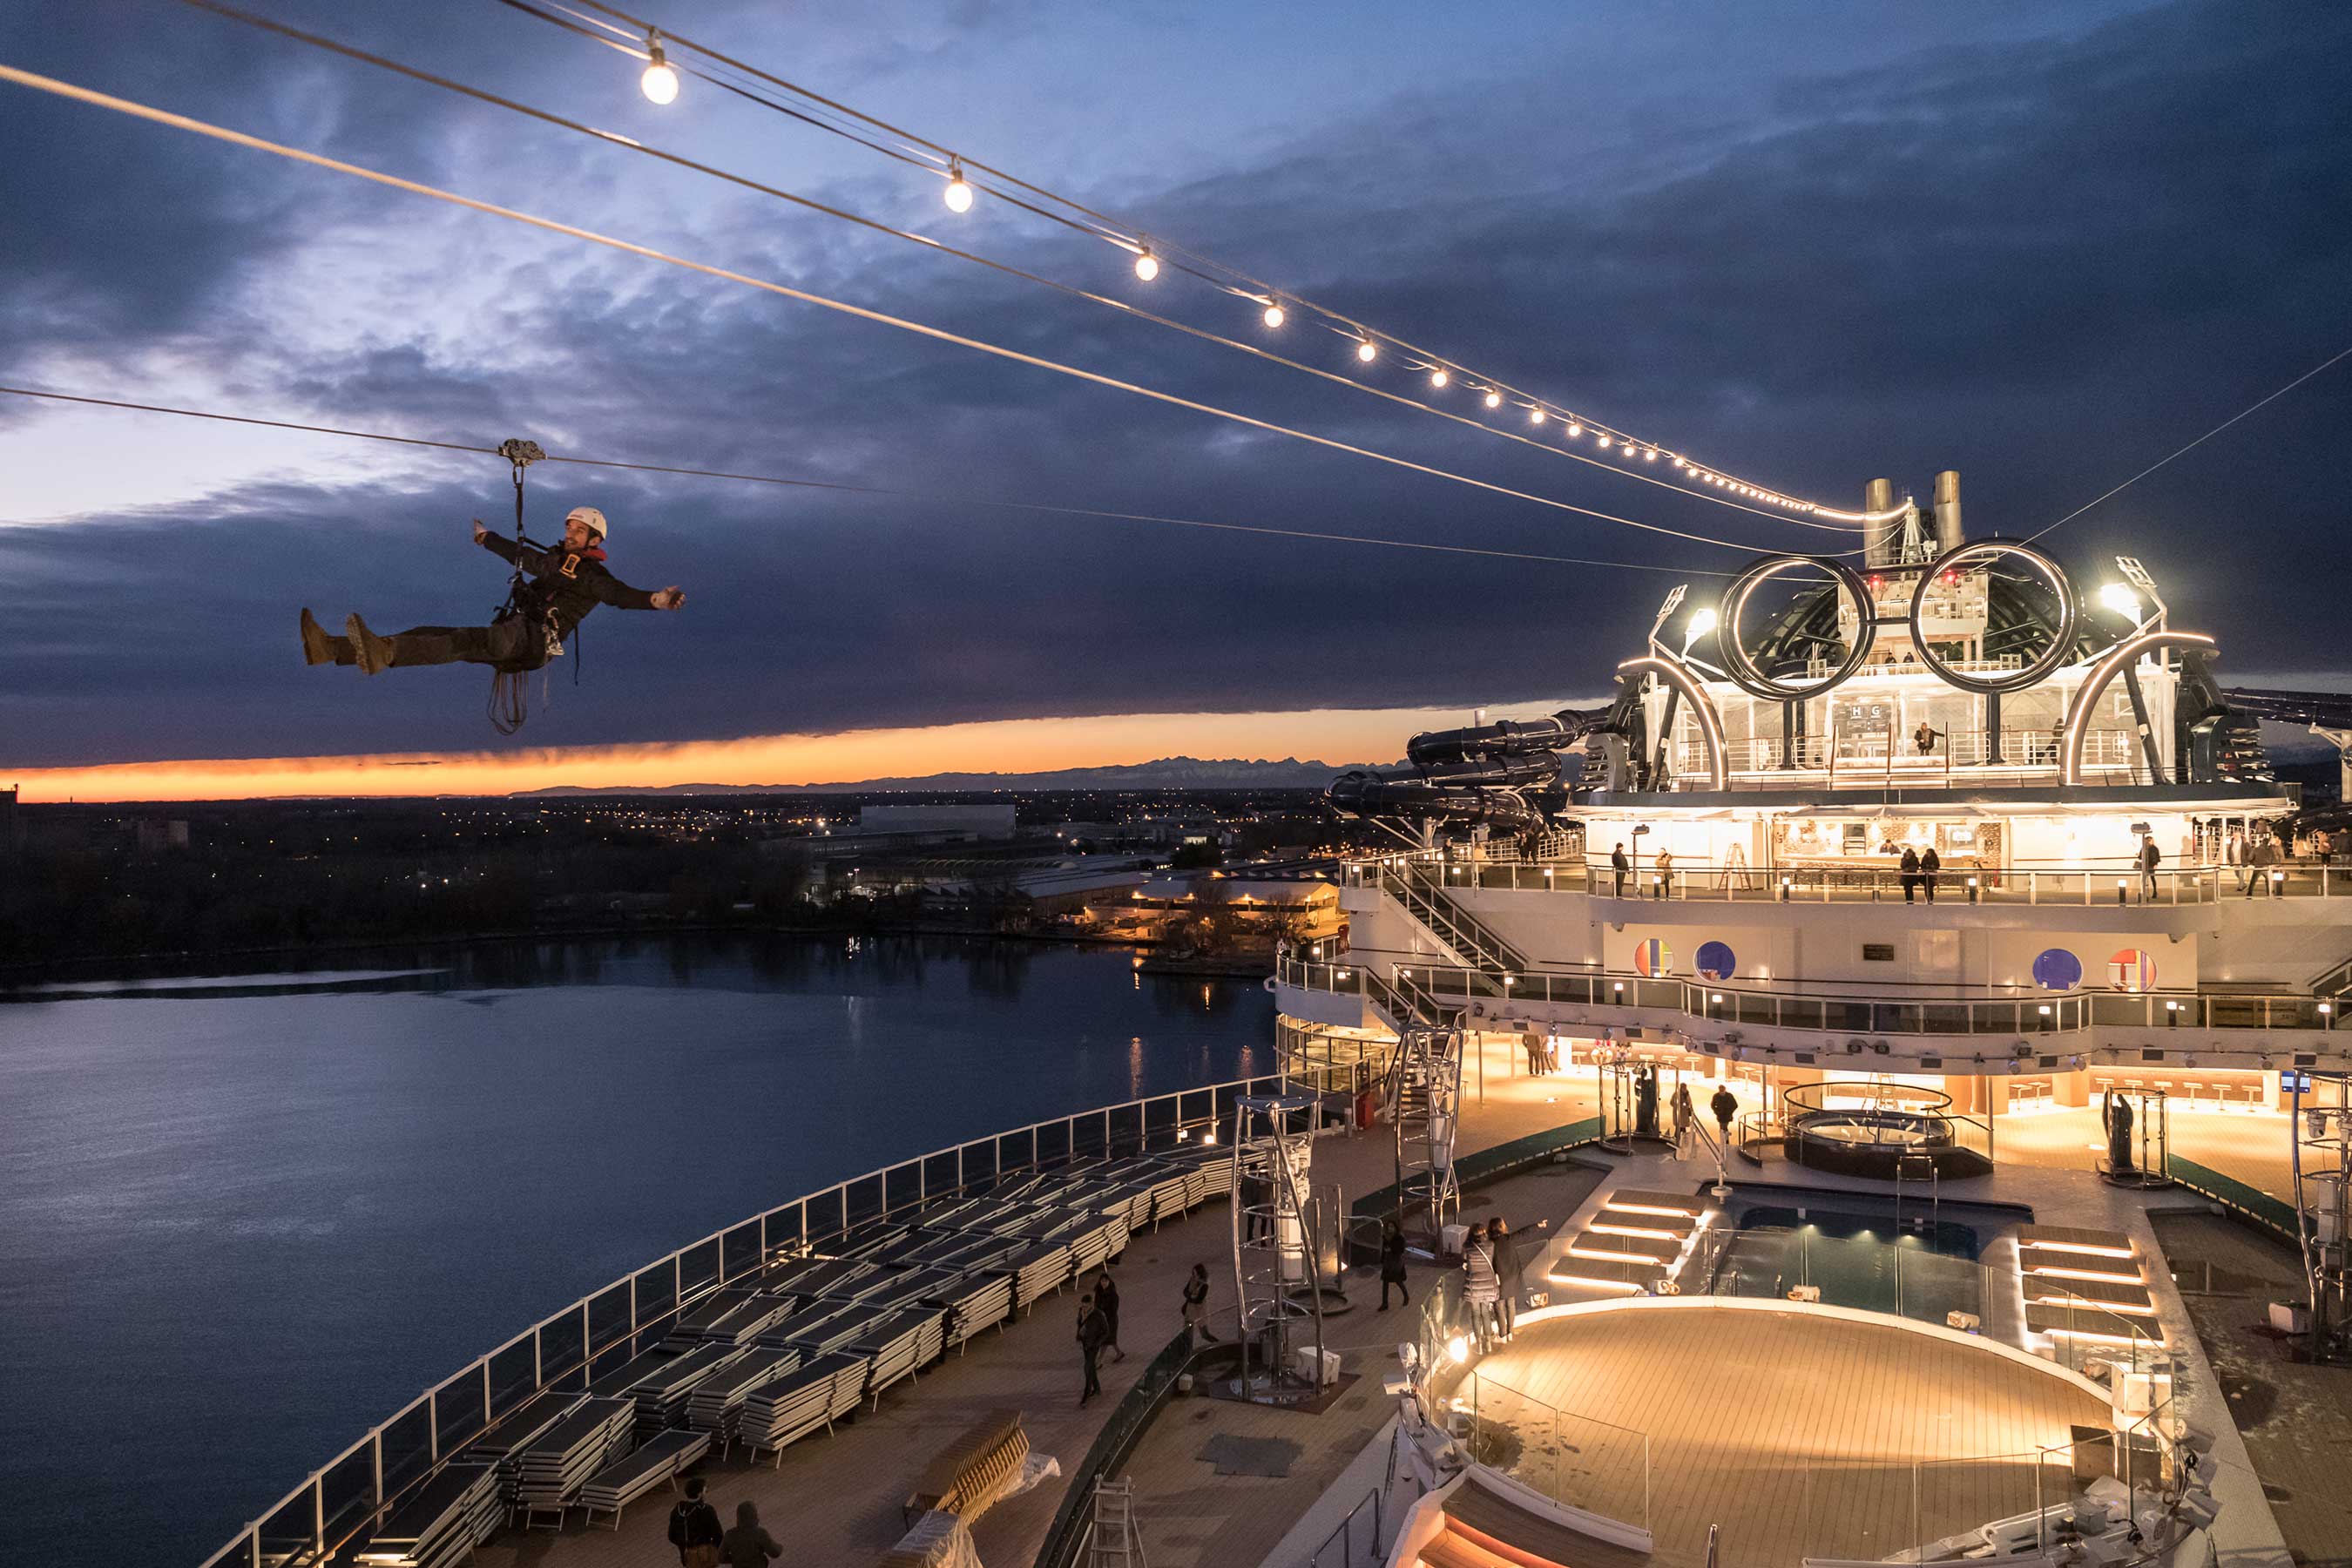 Featuring the longest zip lines at sea, MSC Seaside offers adventure cruisers a unique vantage point of surrounding areas.